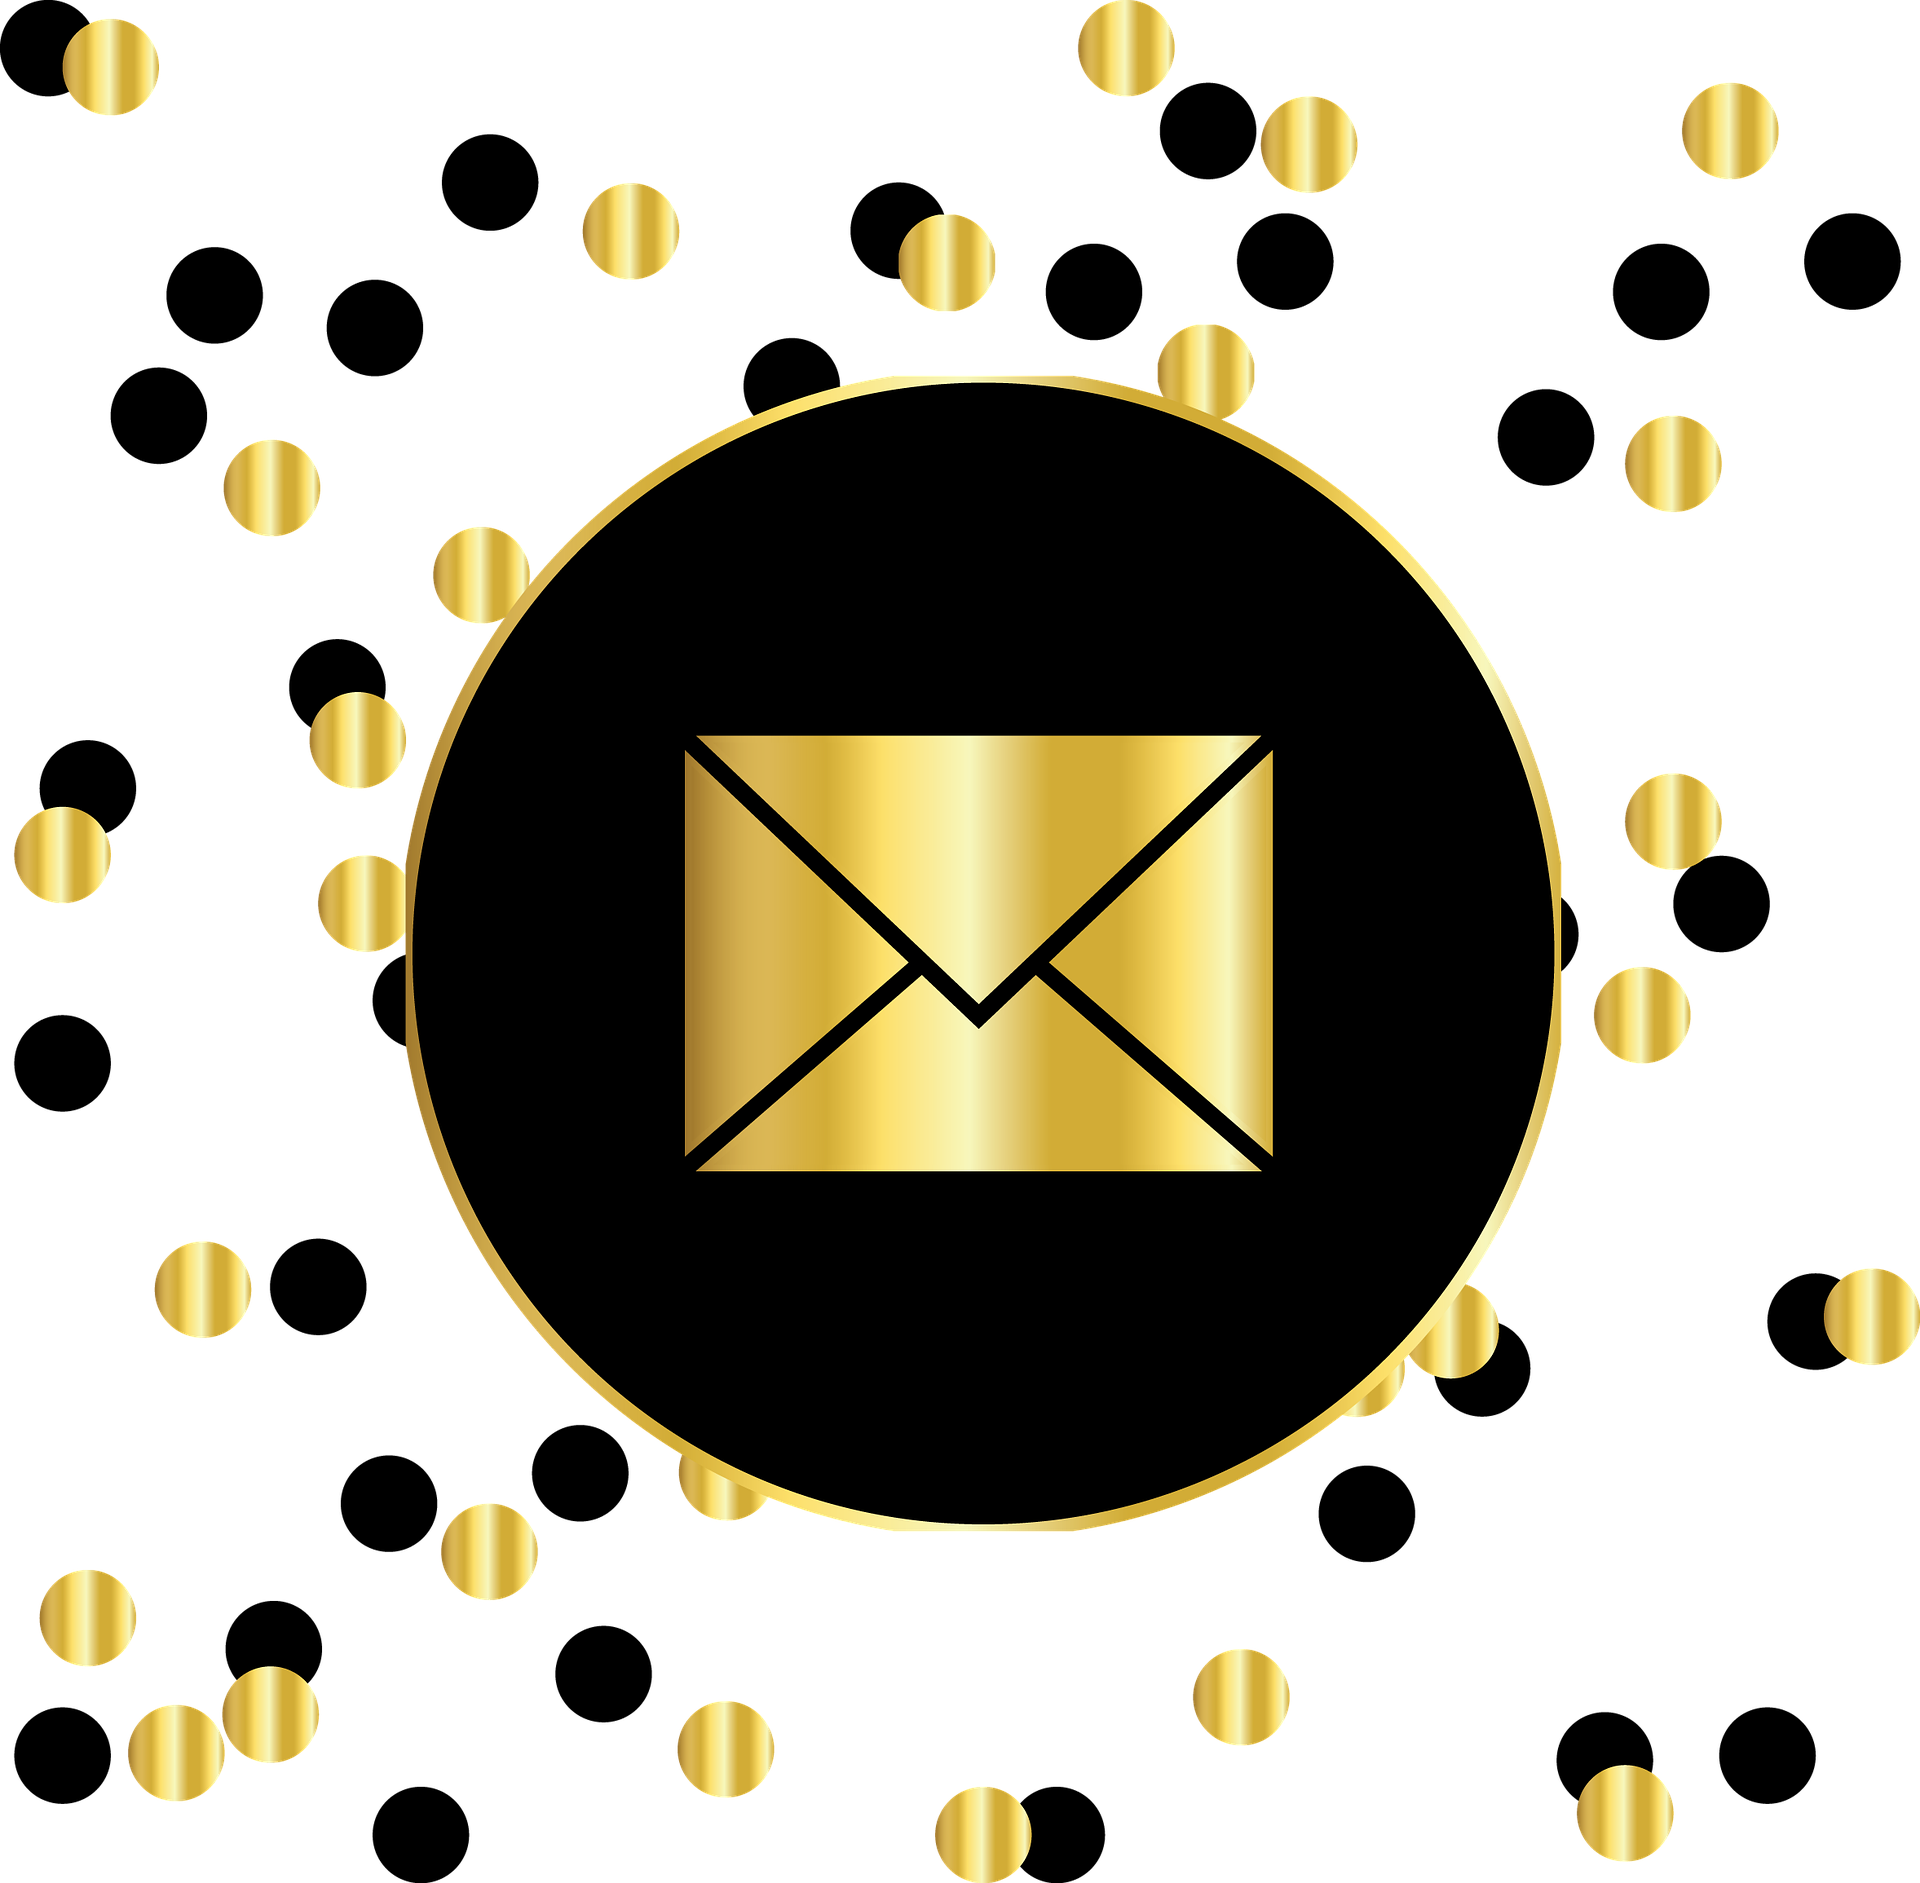 Download Email Gold And Black Circles Instagram Logo Black And Gold Png Image With No Background Pngkey Com